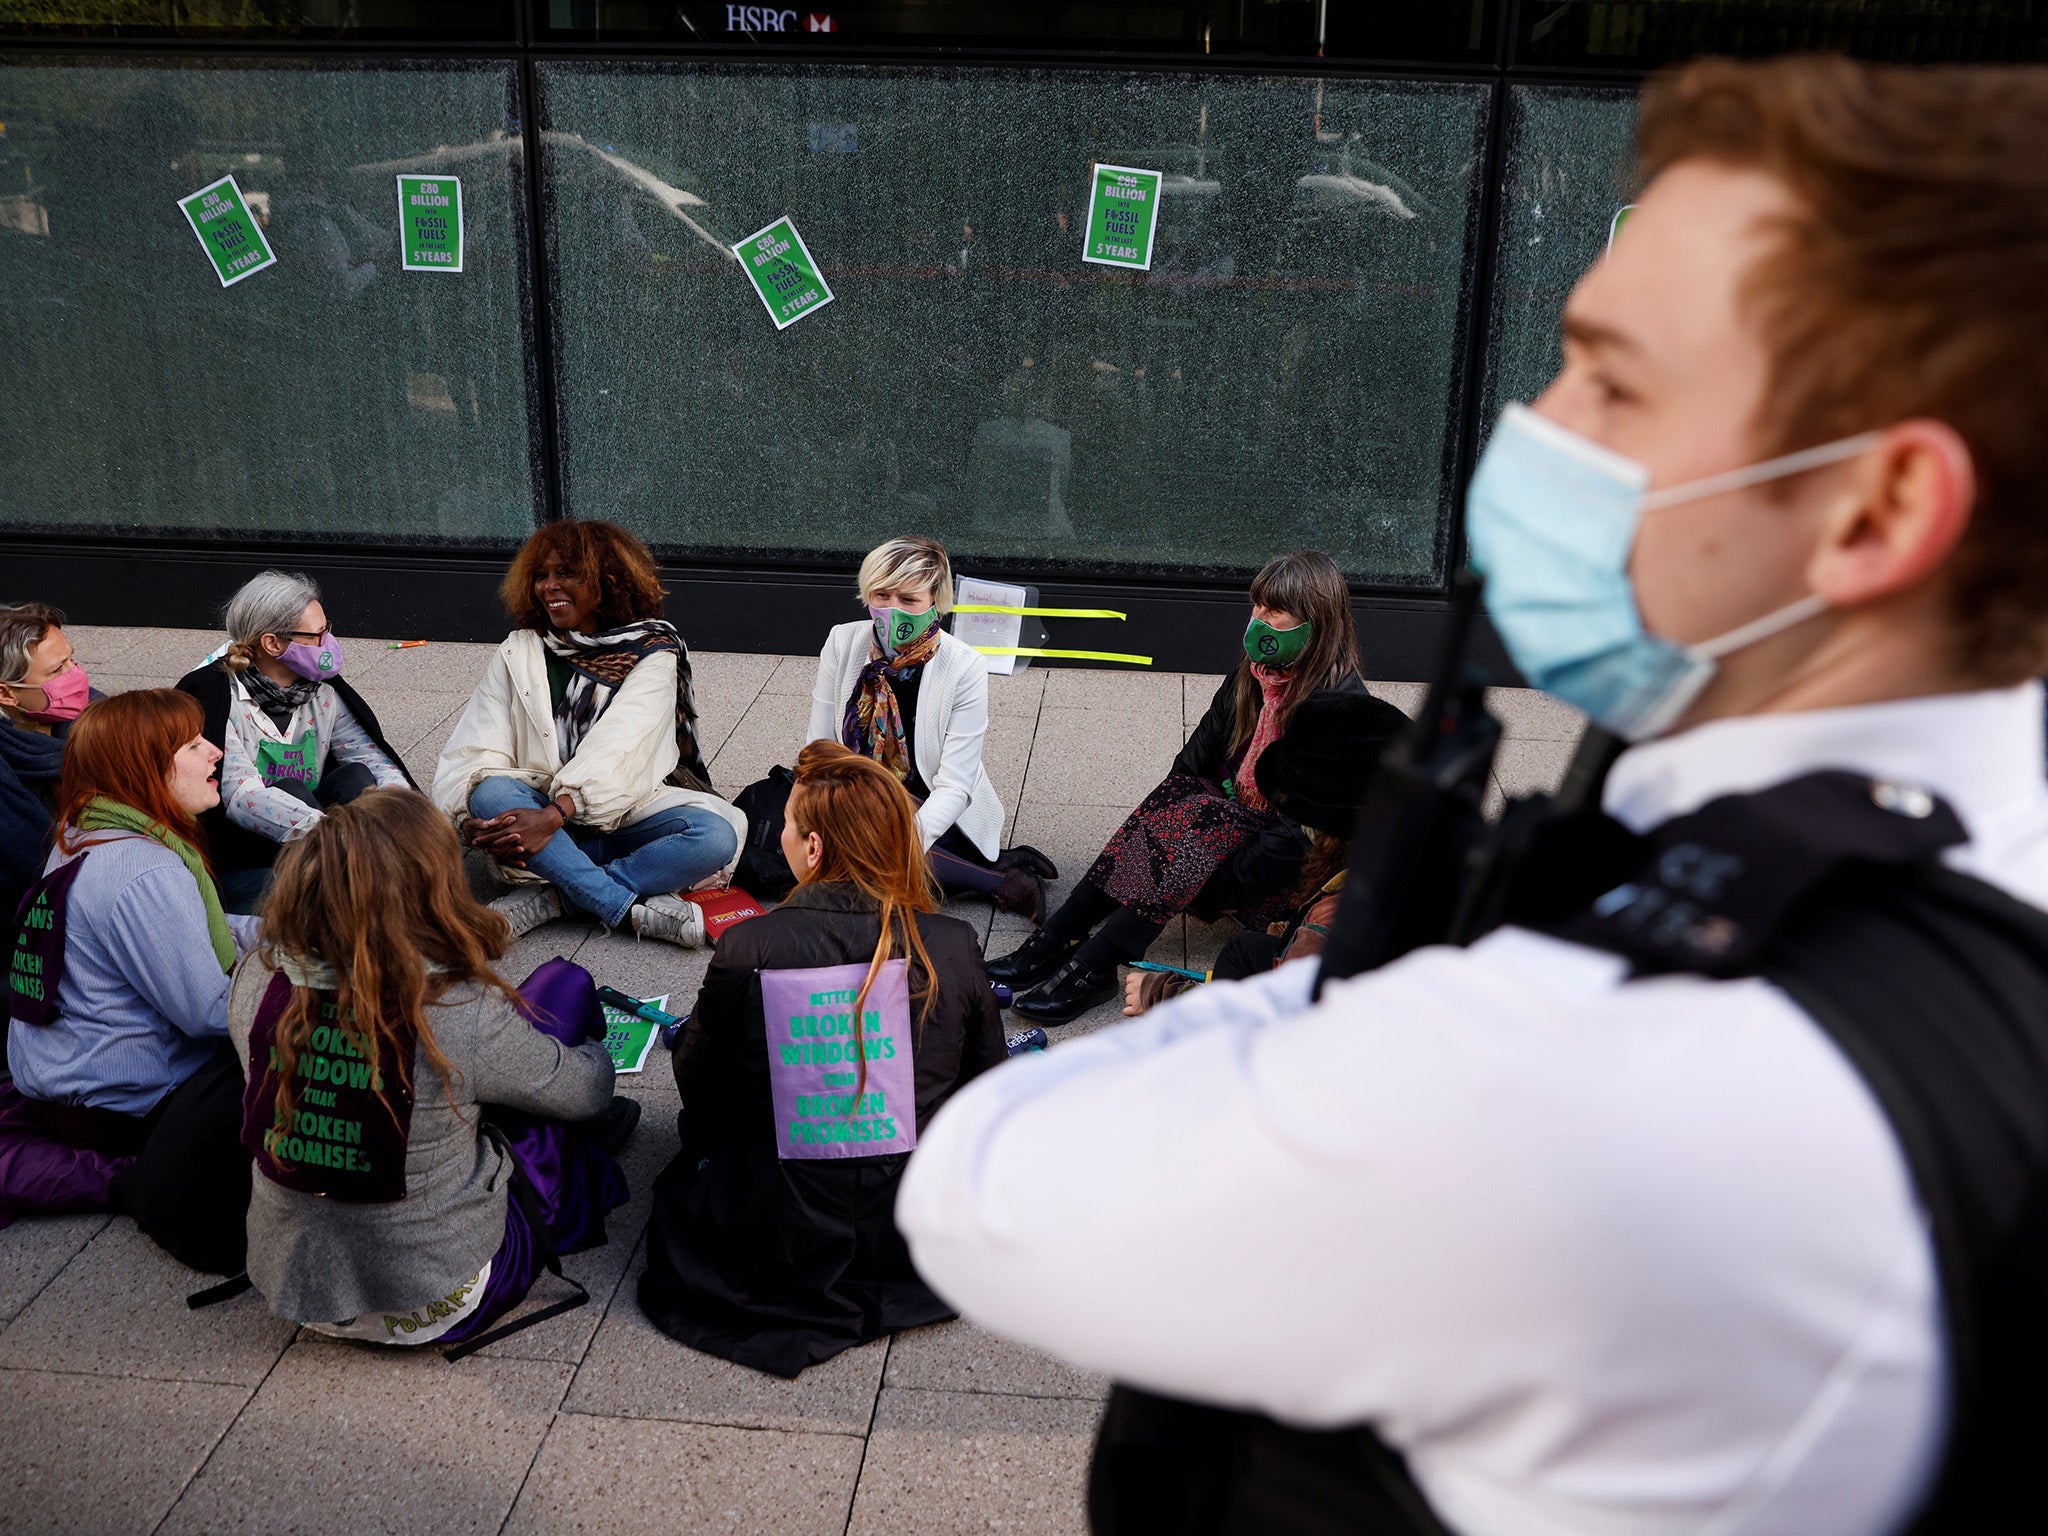 Activists sit down after smashing the windows as police attend the scene